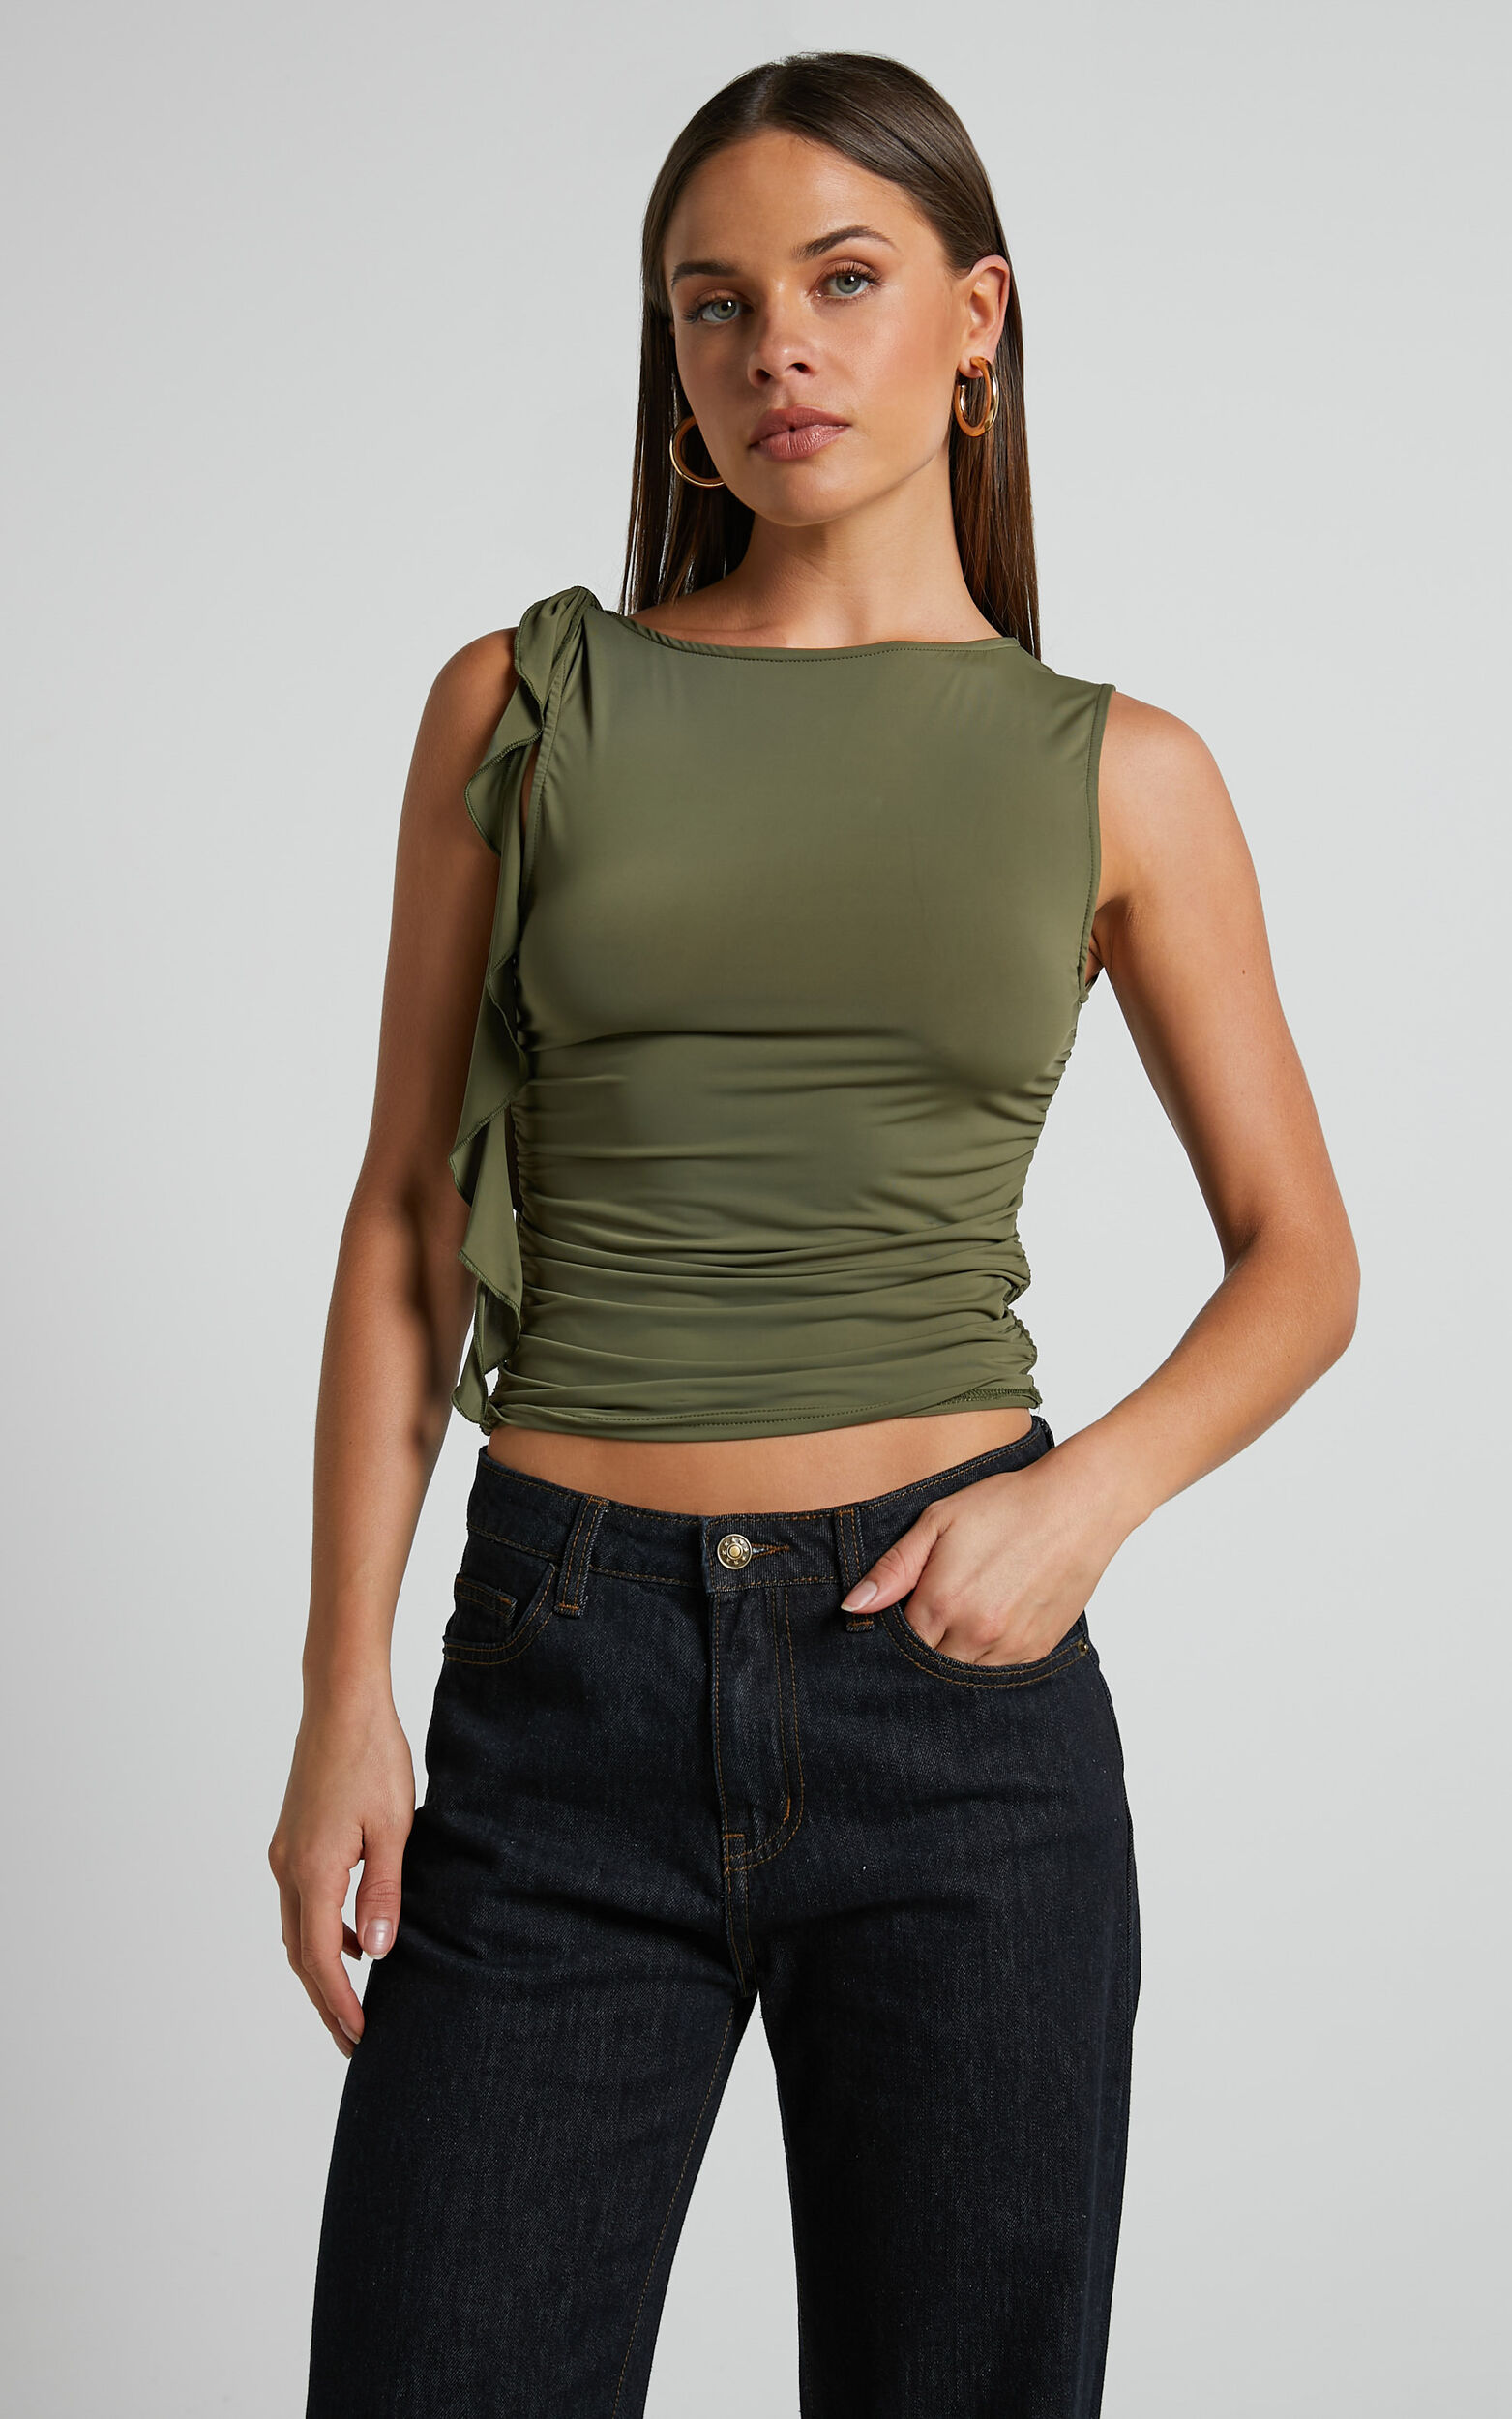 Lioness - Rendezvous Top in Olive | Showpo USA